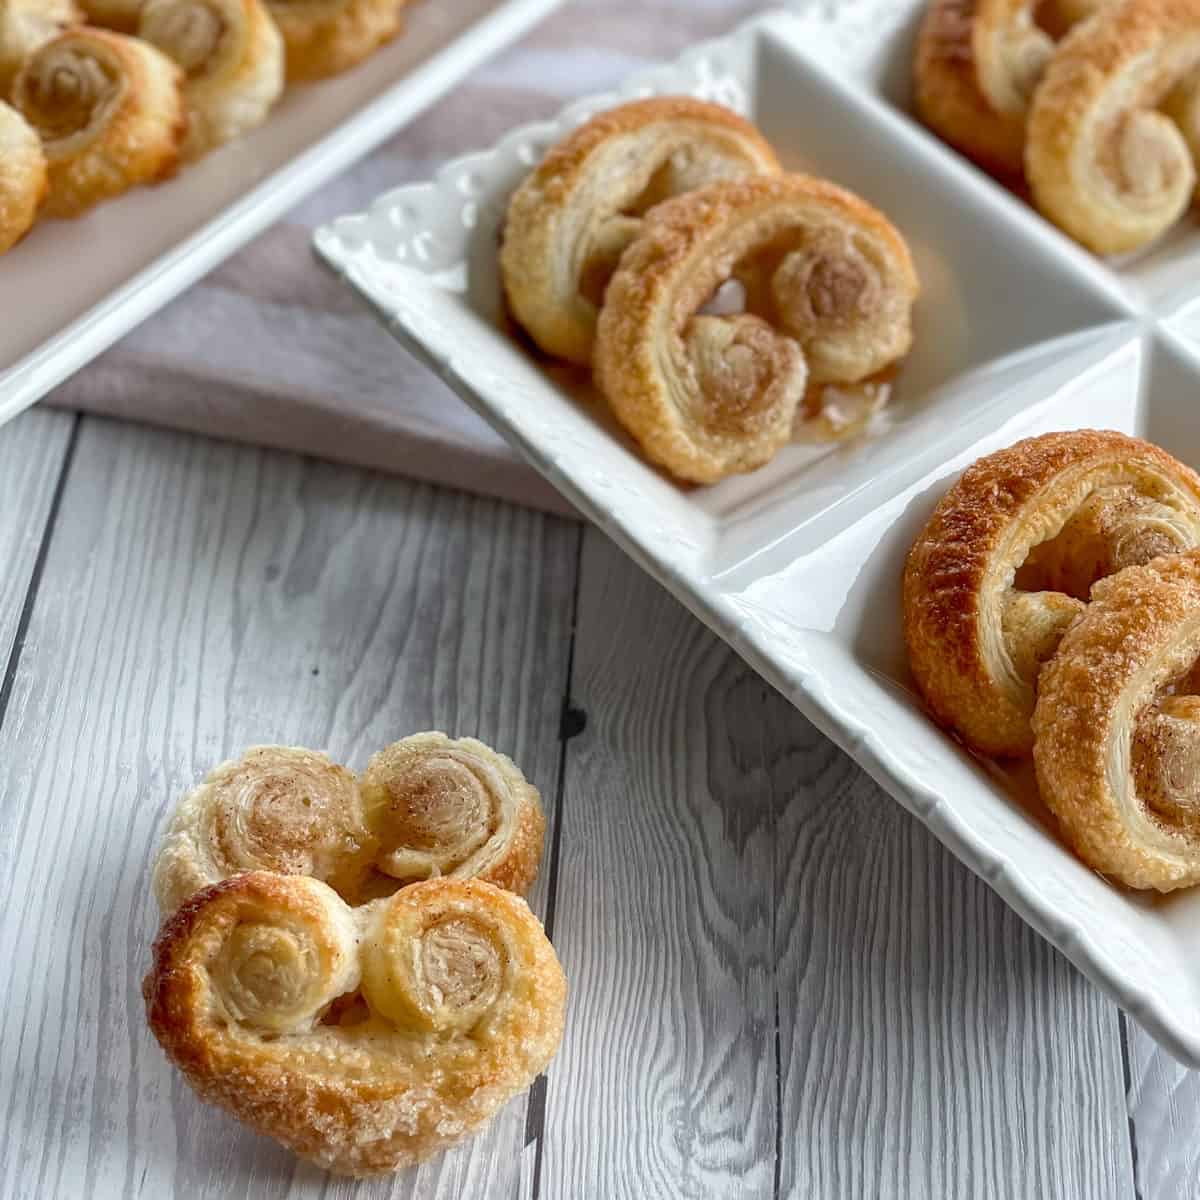 Sugar coated Palmiers